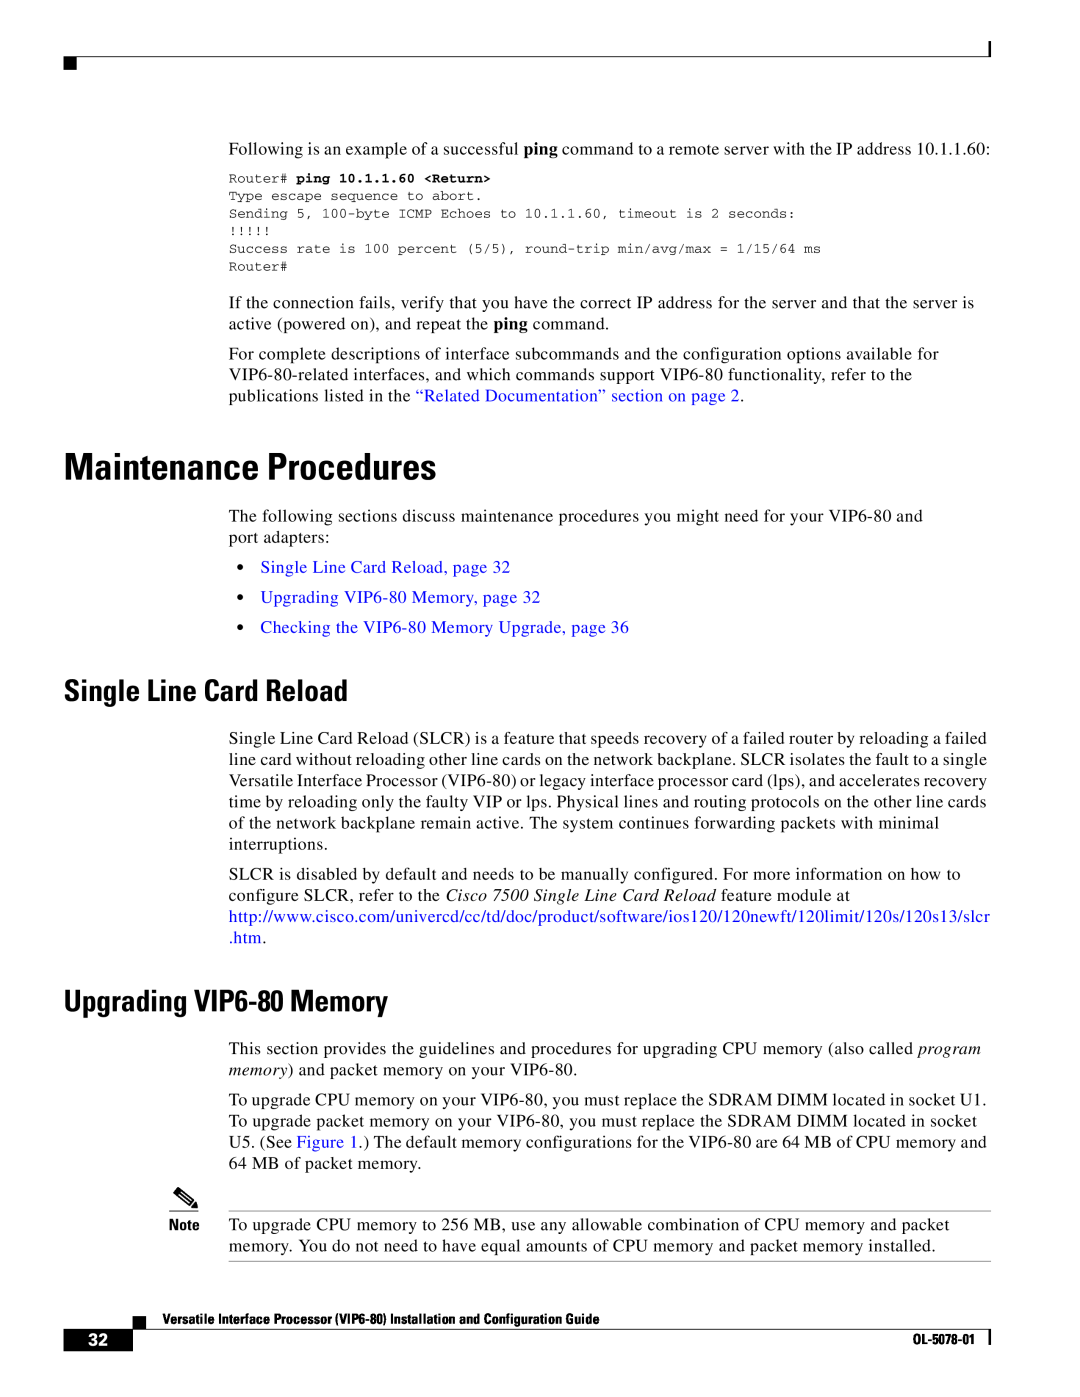 Cisco Systems (VIP6-80) manual Maintenance Procedures, Single Line Card Reload, Upgrading VIP6-80 Memory 